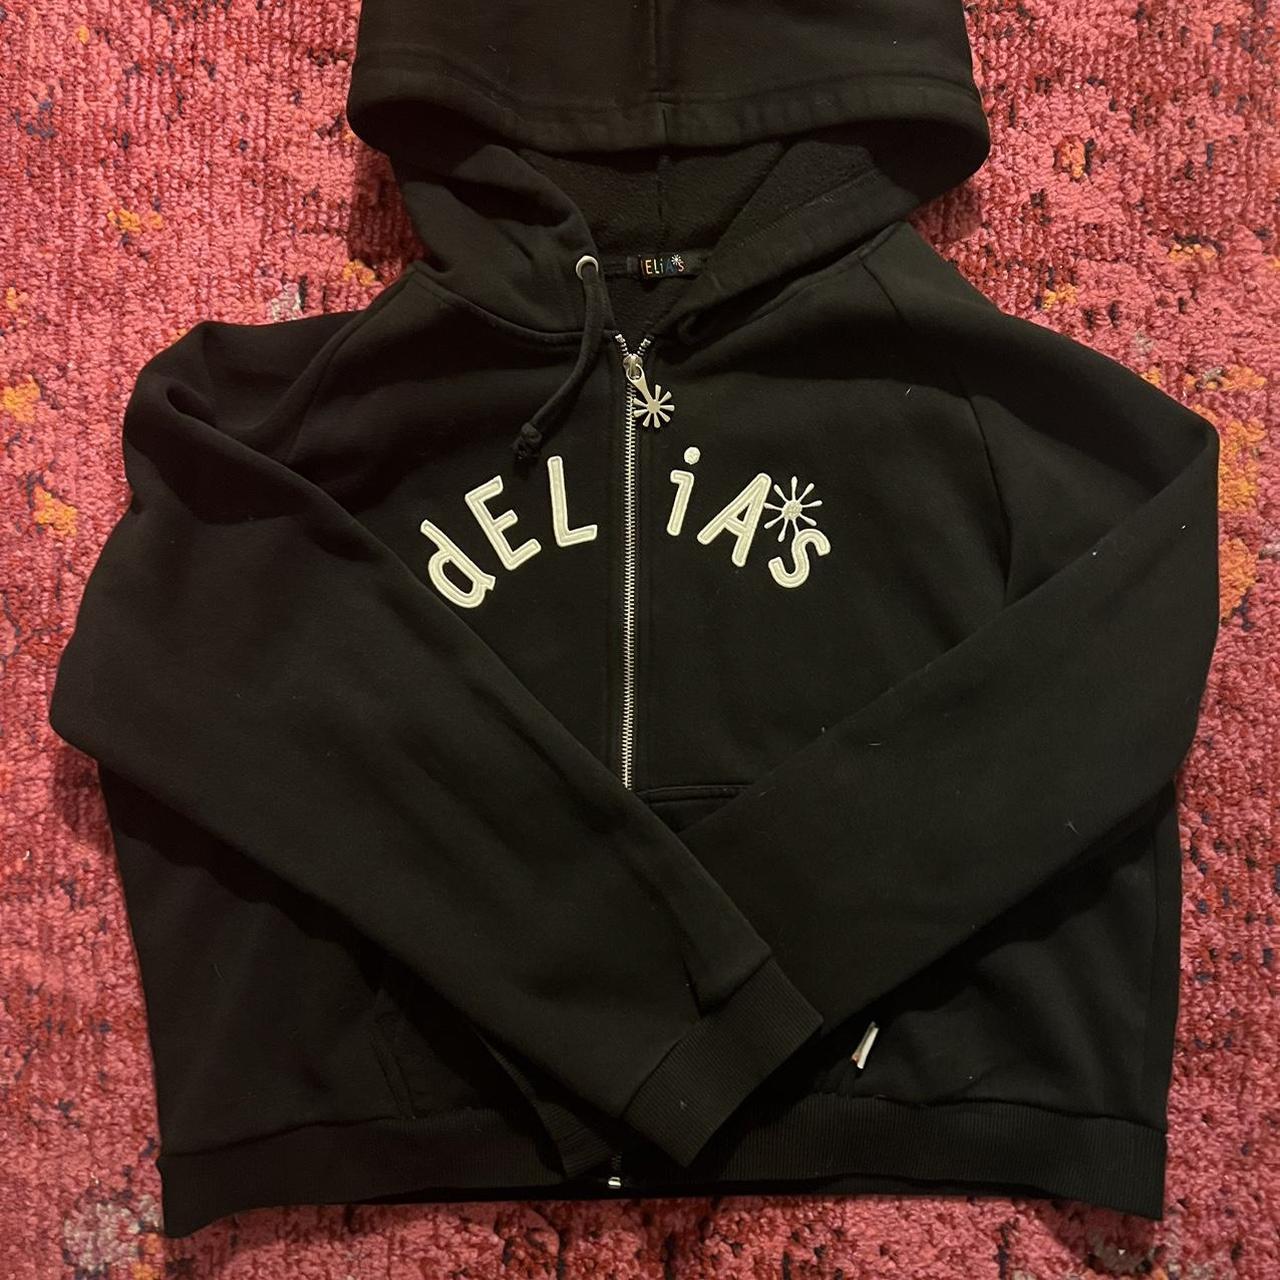 Delia's Women's Black and Silver Hoodie